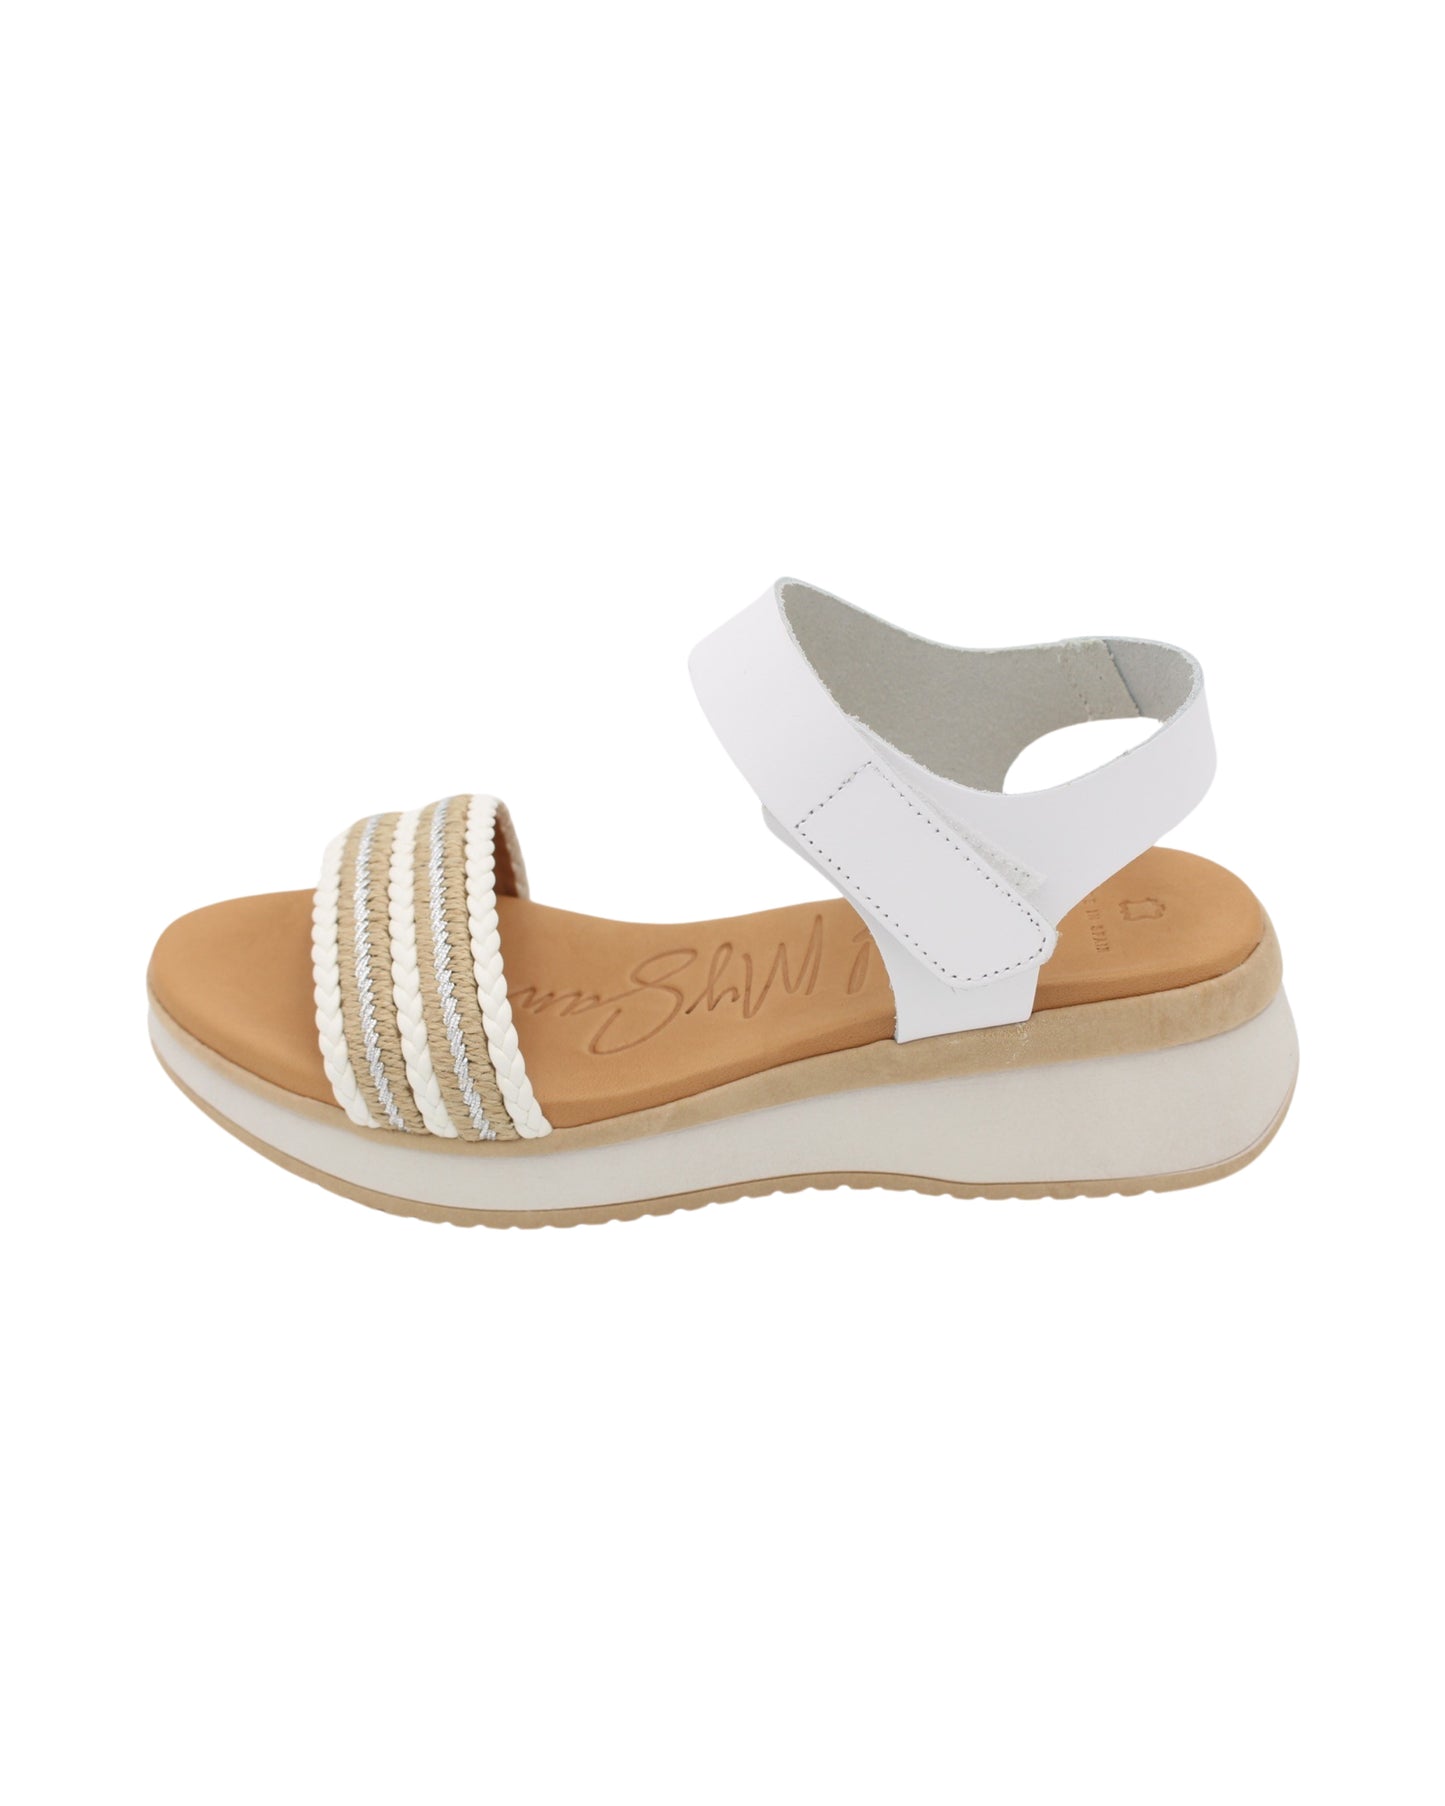 Oh! My Sandals - Ladies Shoes White (2136)